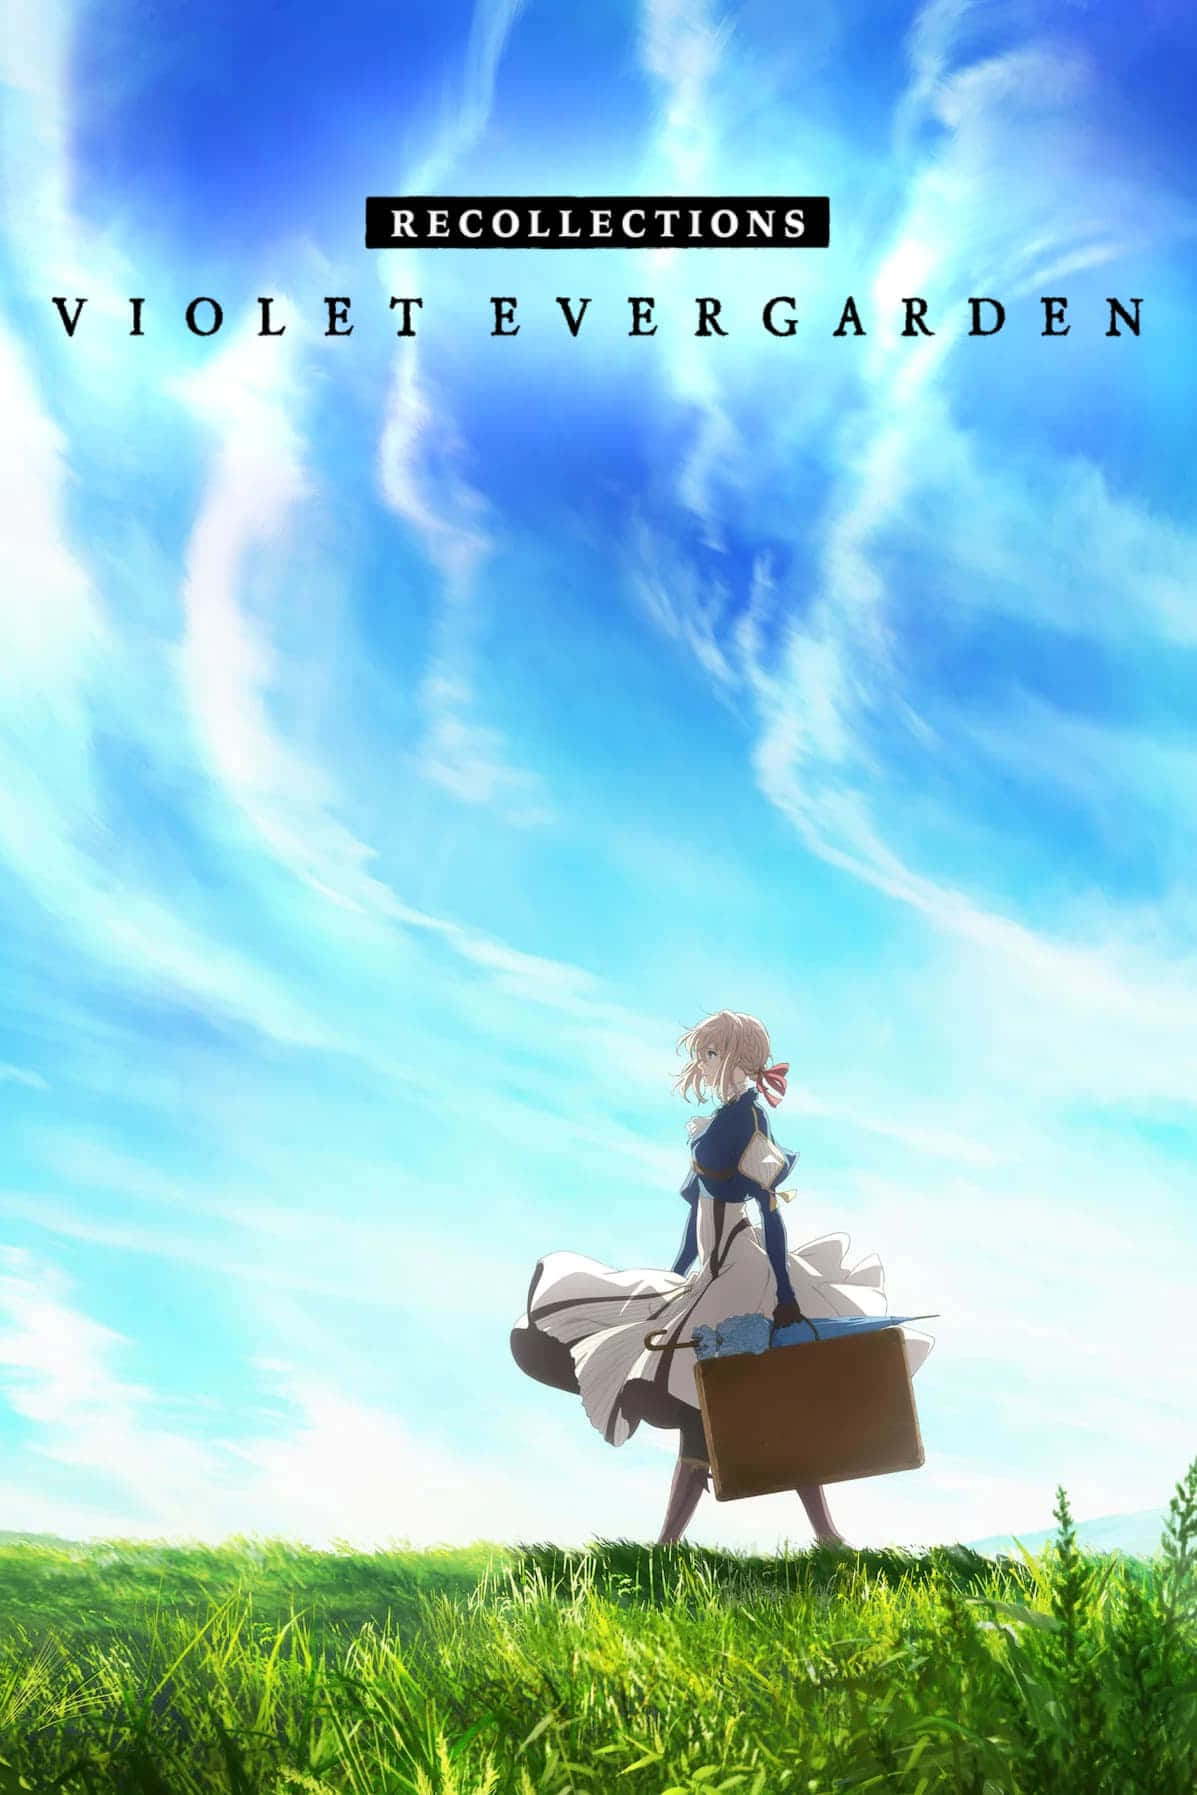 Immaginedel Poster Di Violet Evergarden Recollections.